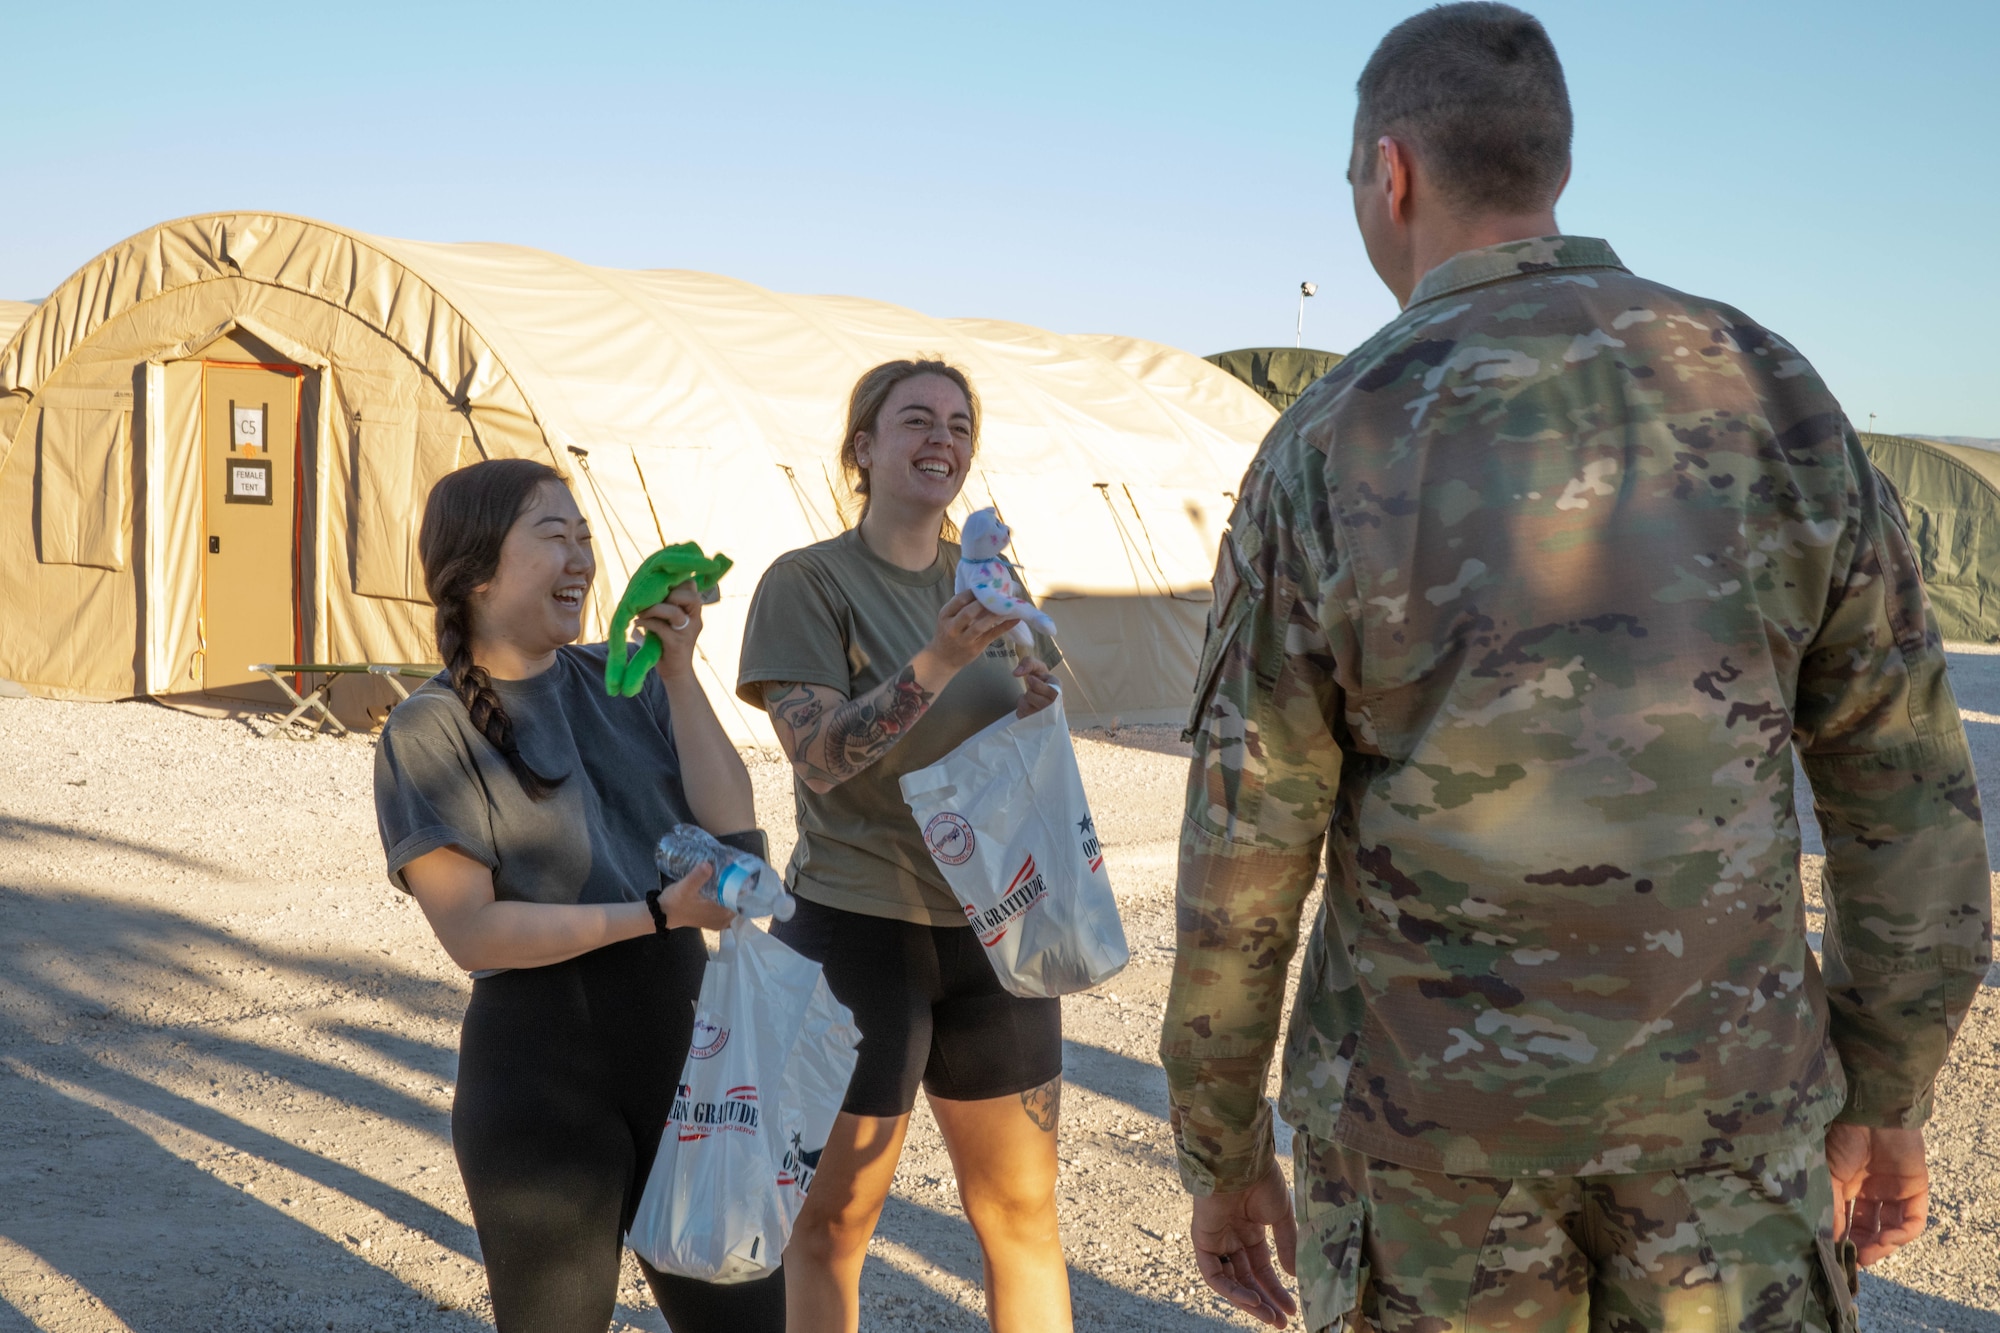 U.S. Air Force Airmen assigned to Task Force Holloman receive care packages from Operation Gratitude, as a thanks for their hard work on Holloman Air Force Base, New Mexico, Oct. 19, 2021. The Department of Defense, through U.S. Northern Command, and in support of the Department of Homeland Security, is providing transportation, temporary housing, medical screening, and general support for at least 50,000 Afghan evacuees at suitable facilities, in permanent or temporary structures, as quickly as possible. This initiative provides Afghan personnel essential support at secure locations outside Afghanistan. (U.S. Army Photo By Pfc. Anthony Ford)